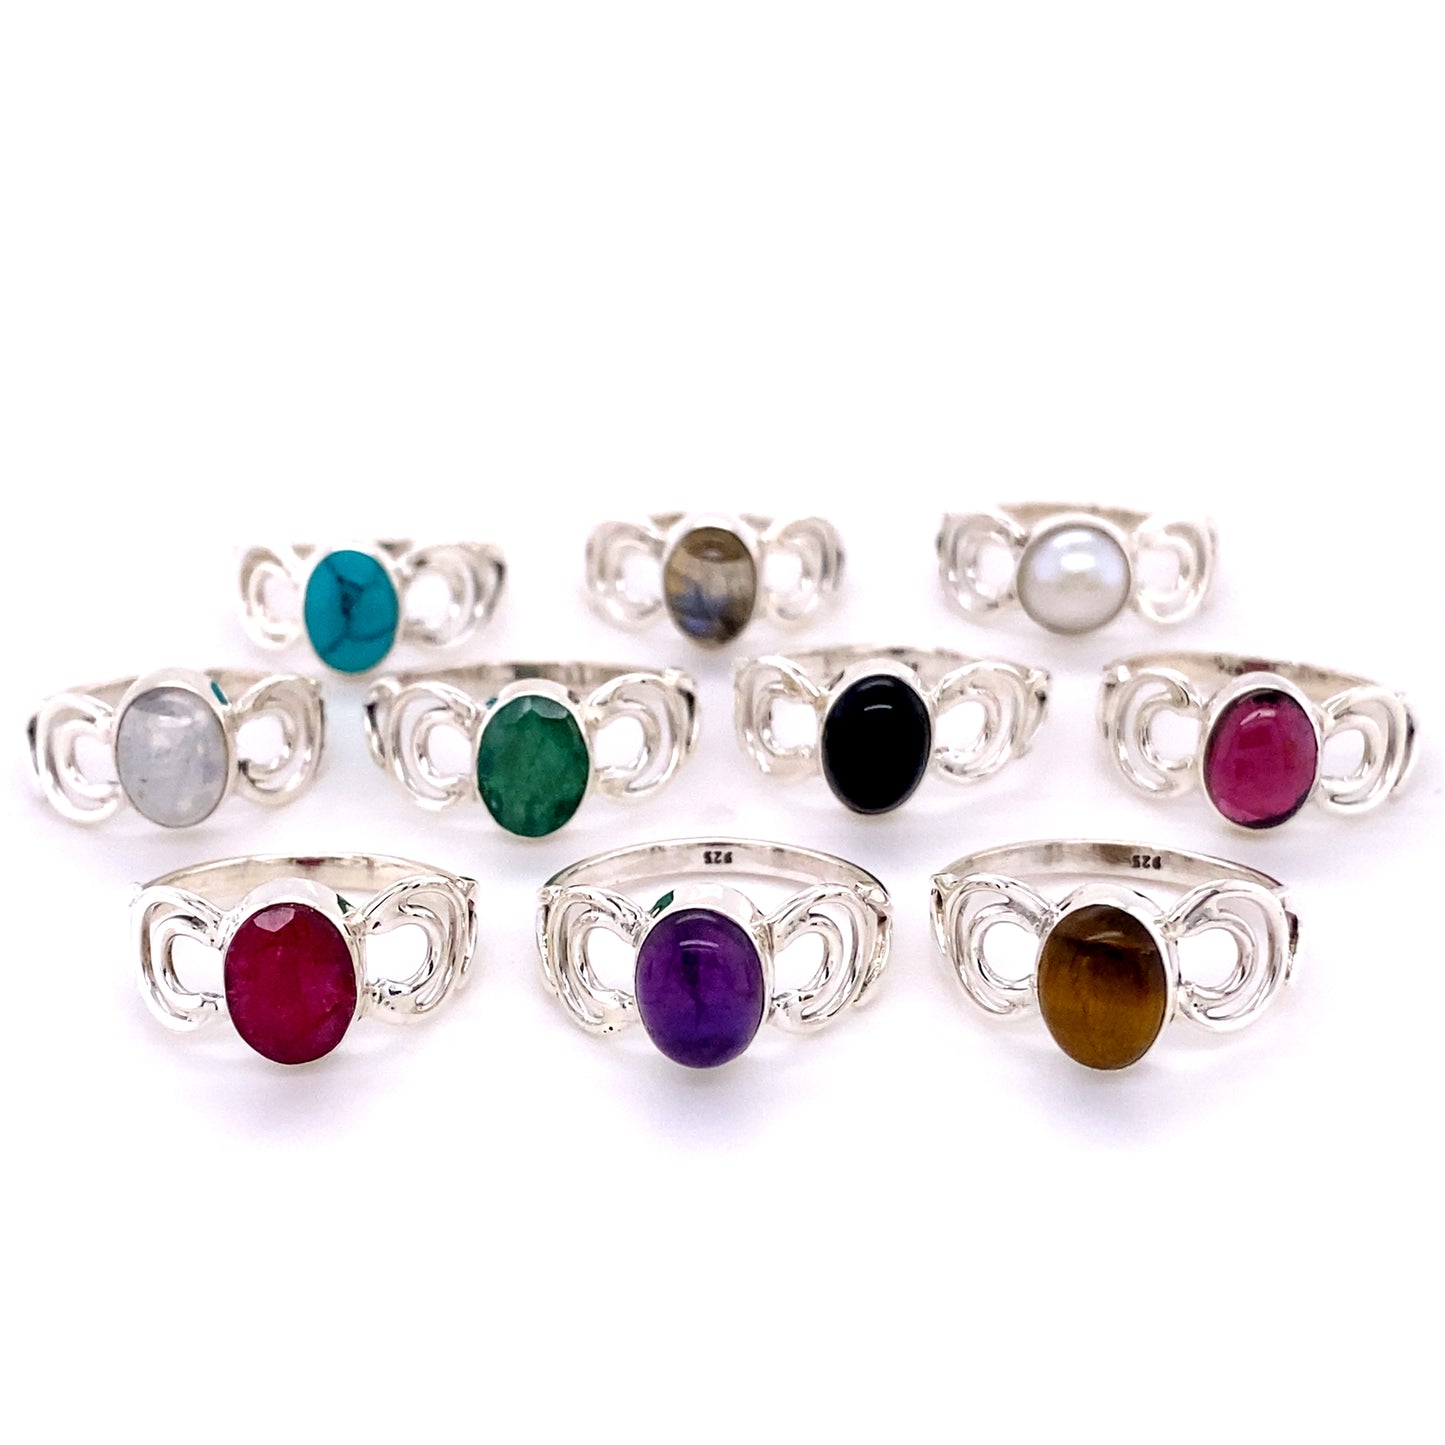 A set of Oval Gemstone Rings with Moon Design adorned with vibrant cabochon stones.